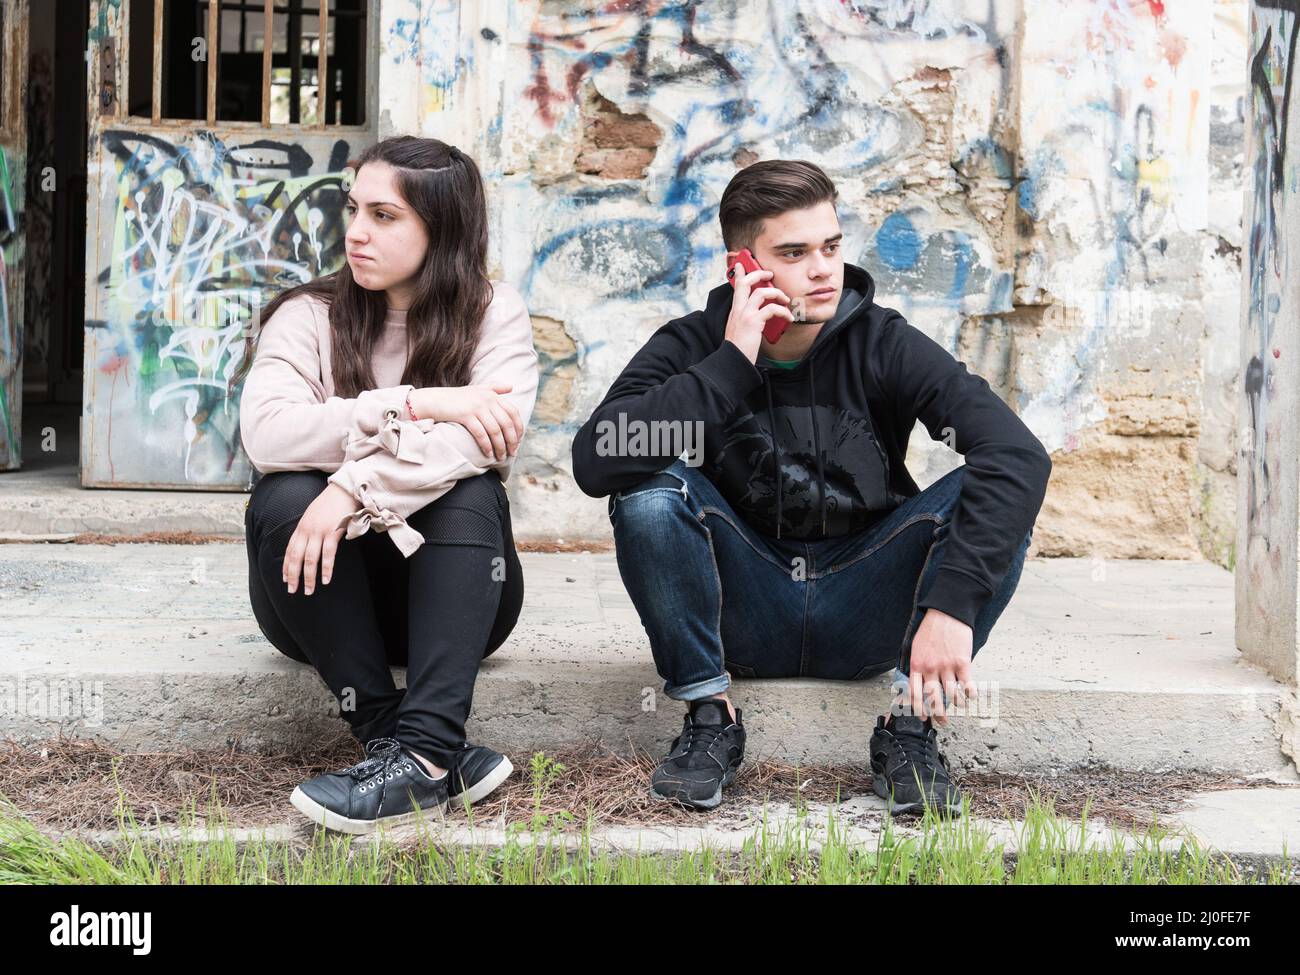 Young teenage boy talking on the mobile phone and ignoring the girl. Concept of mobile addiction Stock Photo